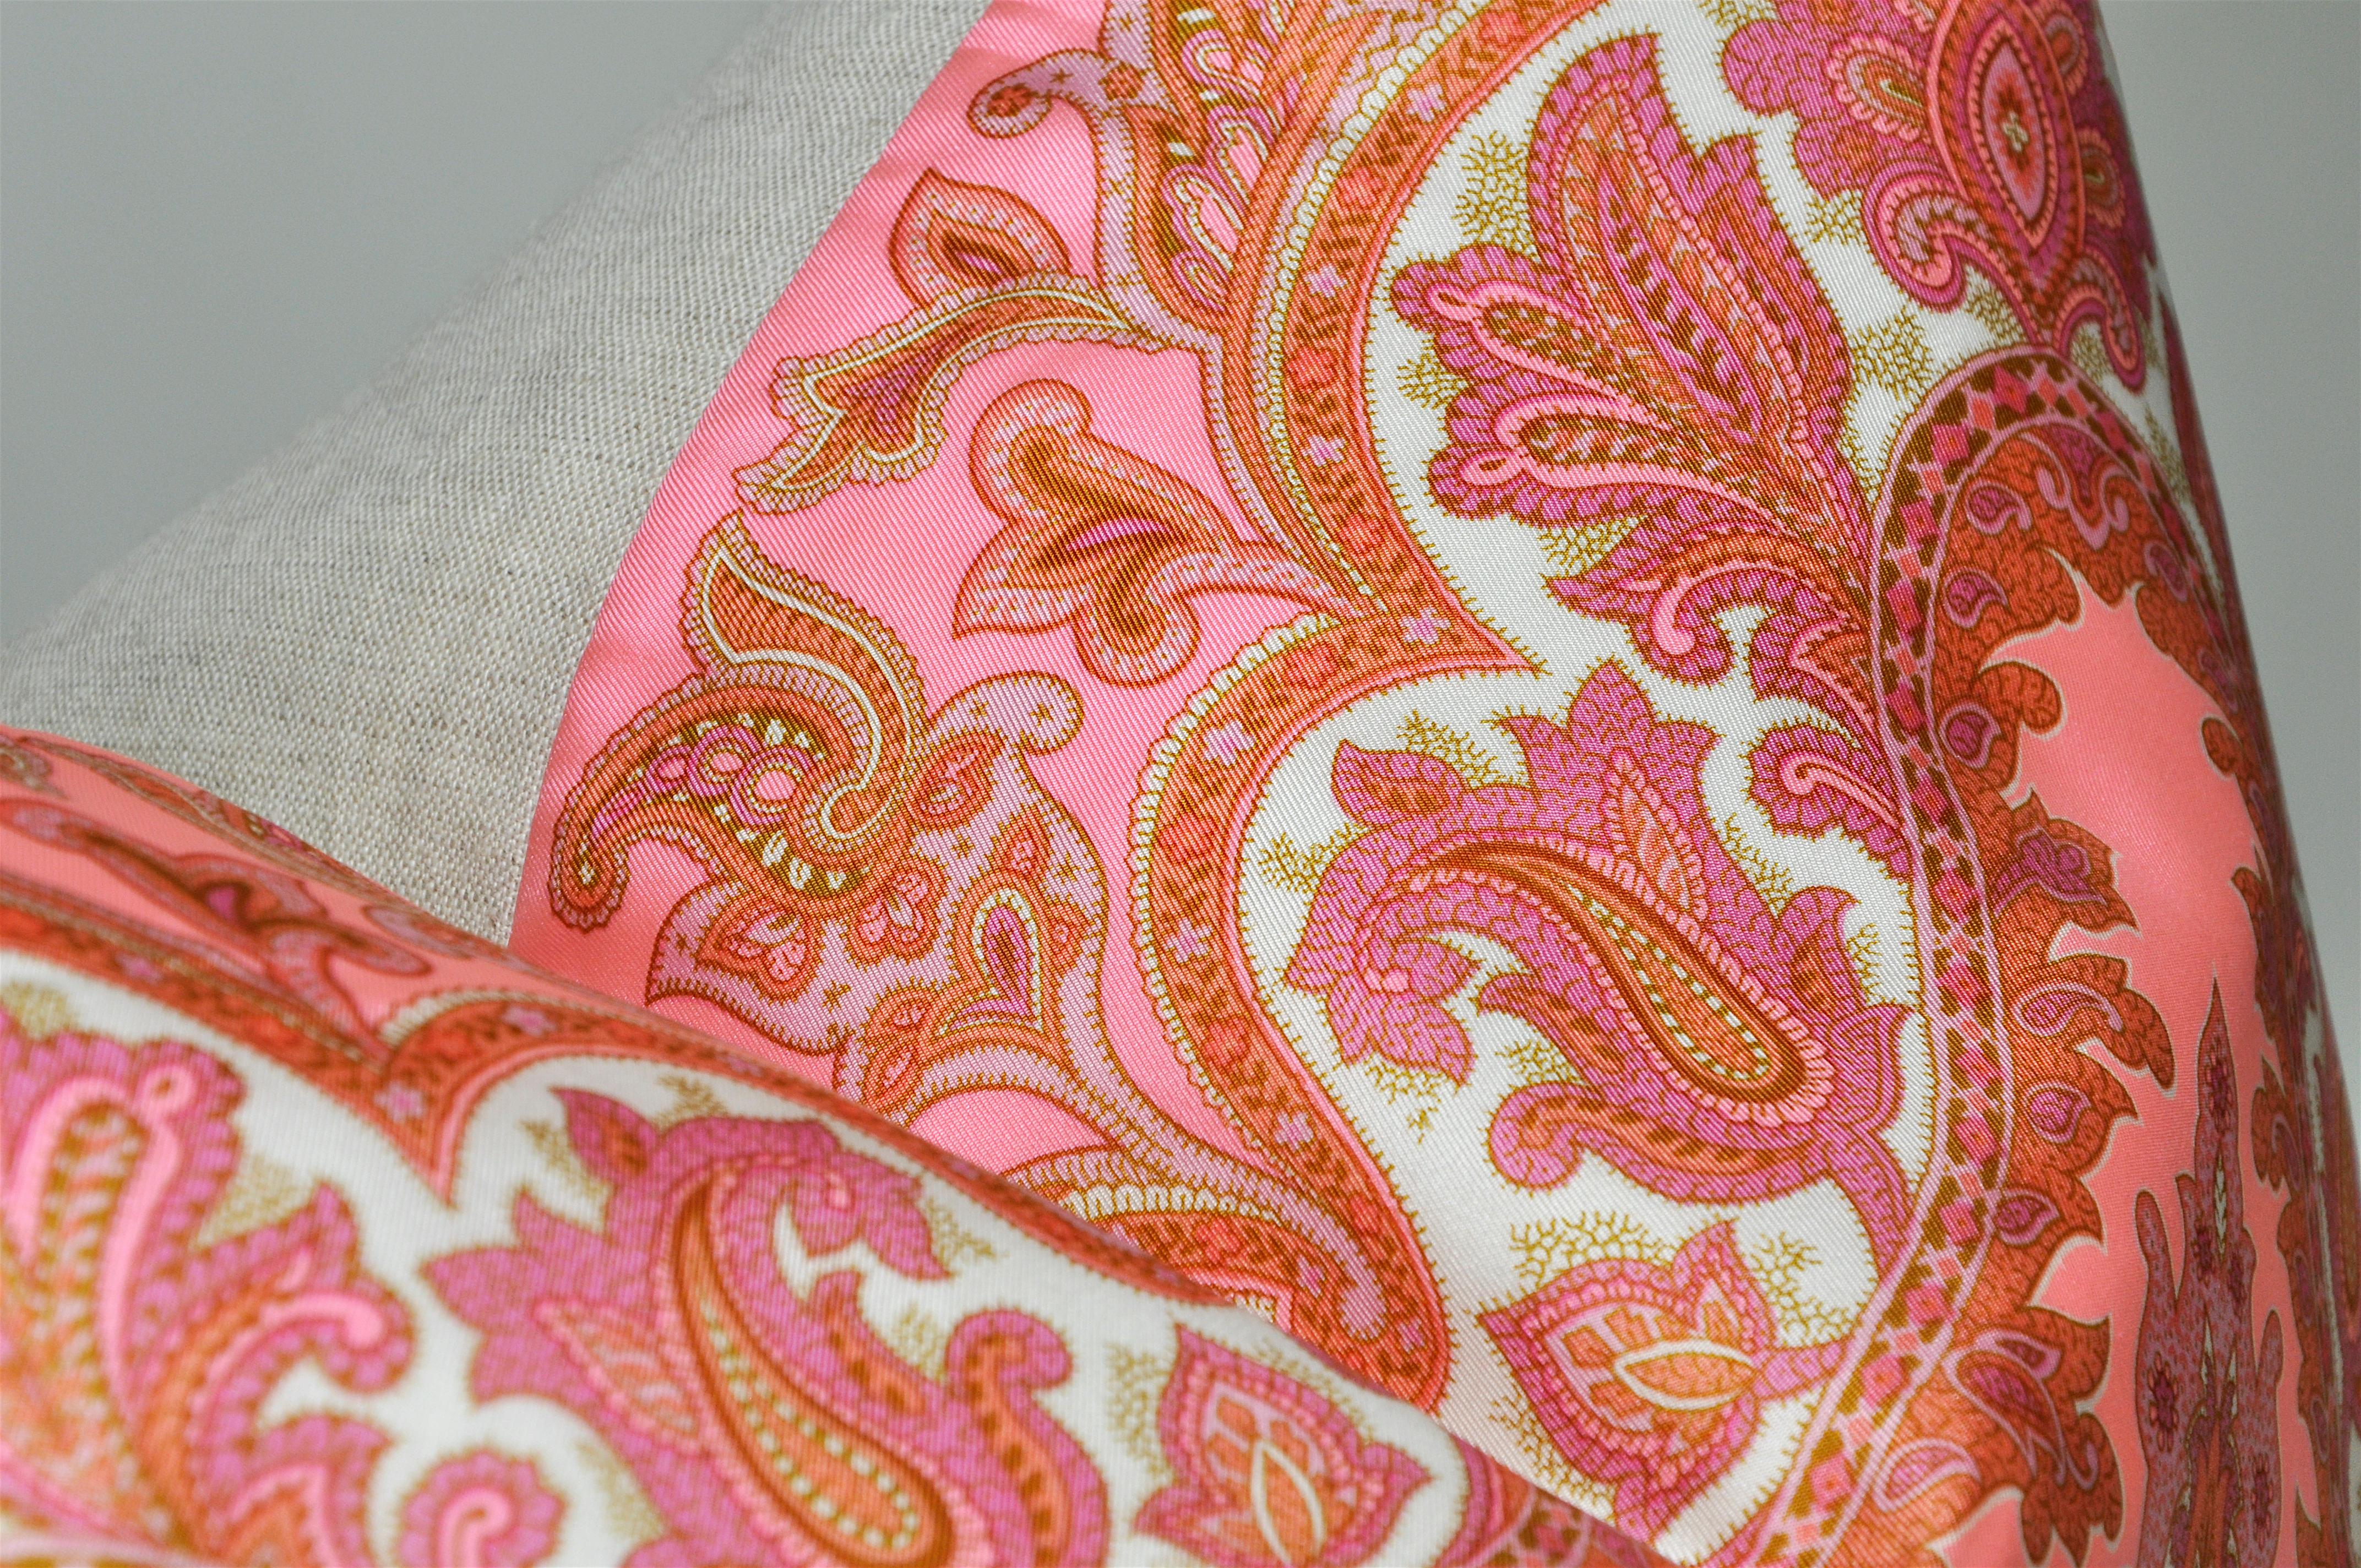 Large Vintage Liberty of London Pink Orange Silk Scarf with Irish Linen Cushion In Good Condition For Sale In Belfast, Northern Ireland